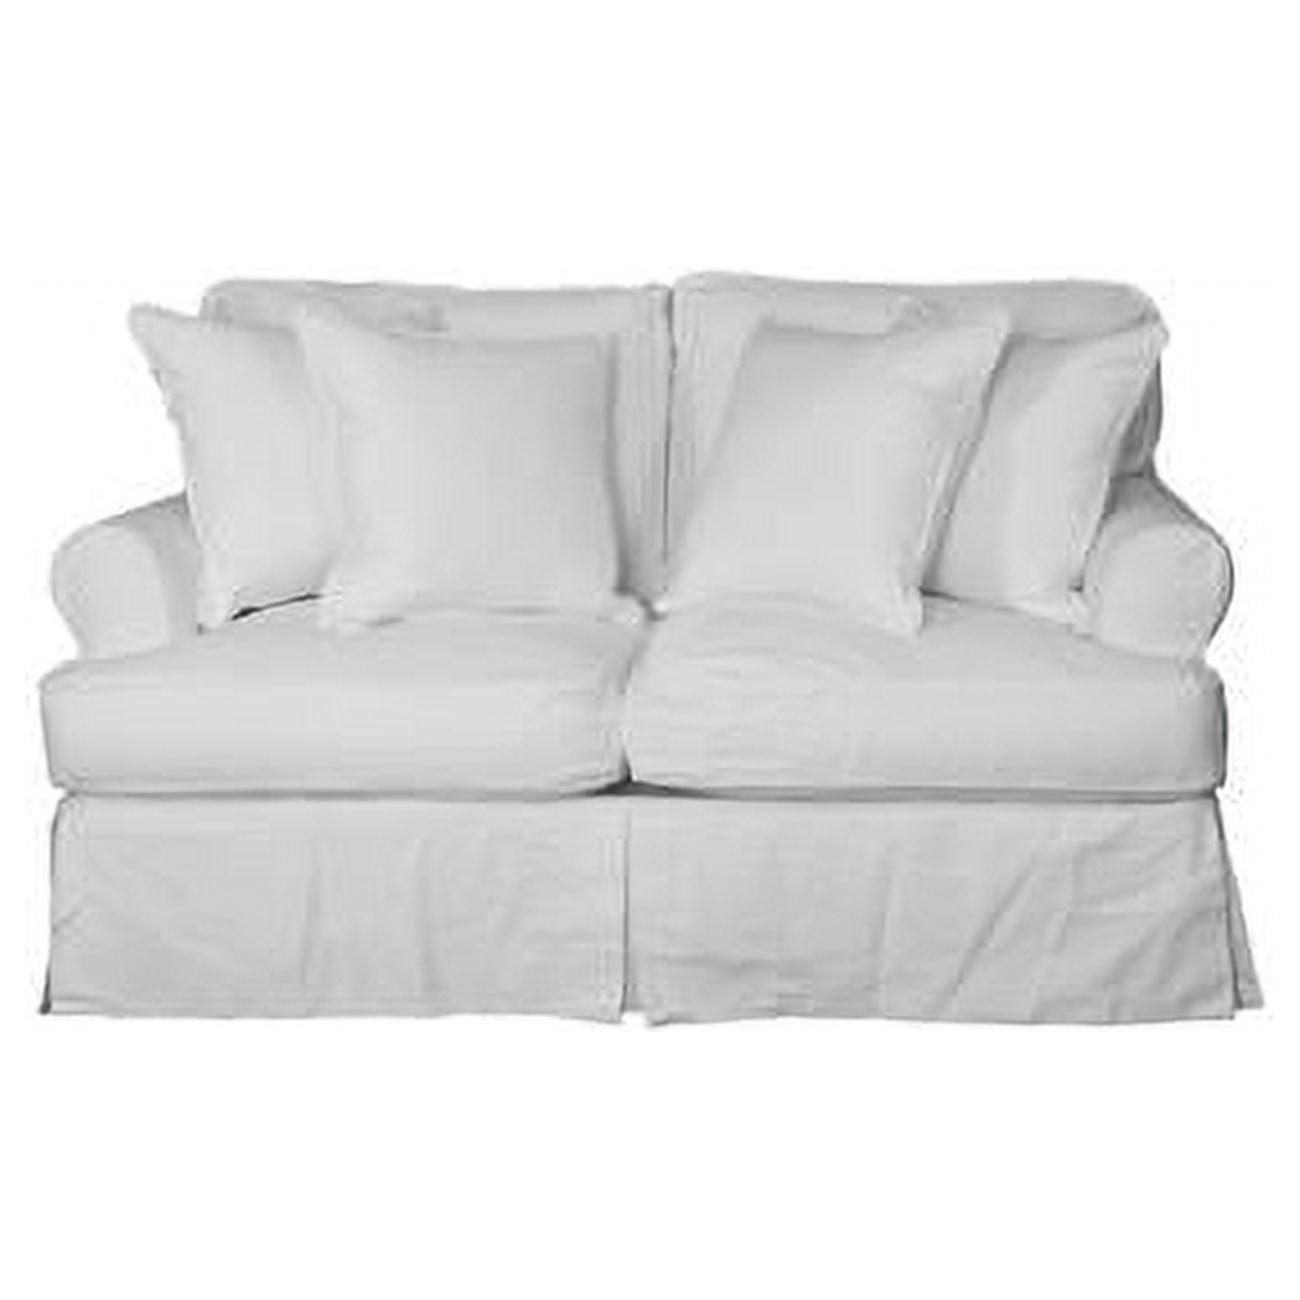 Peyton Pearl Transitional Loveseat Slipcover Set with Zipper